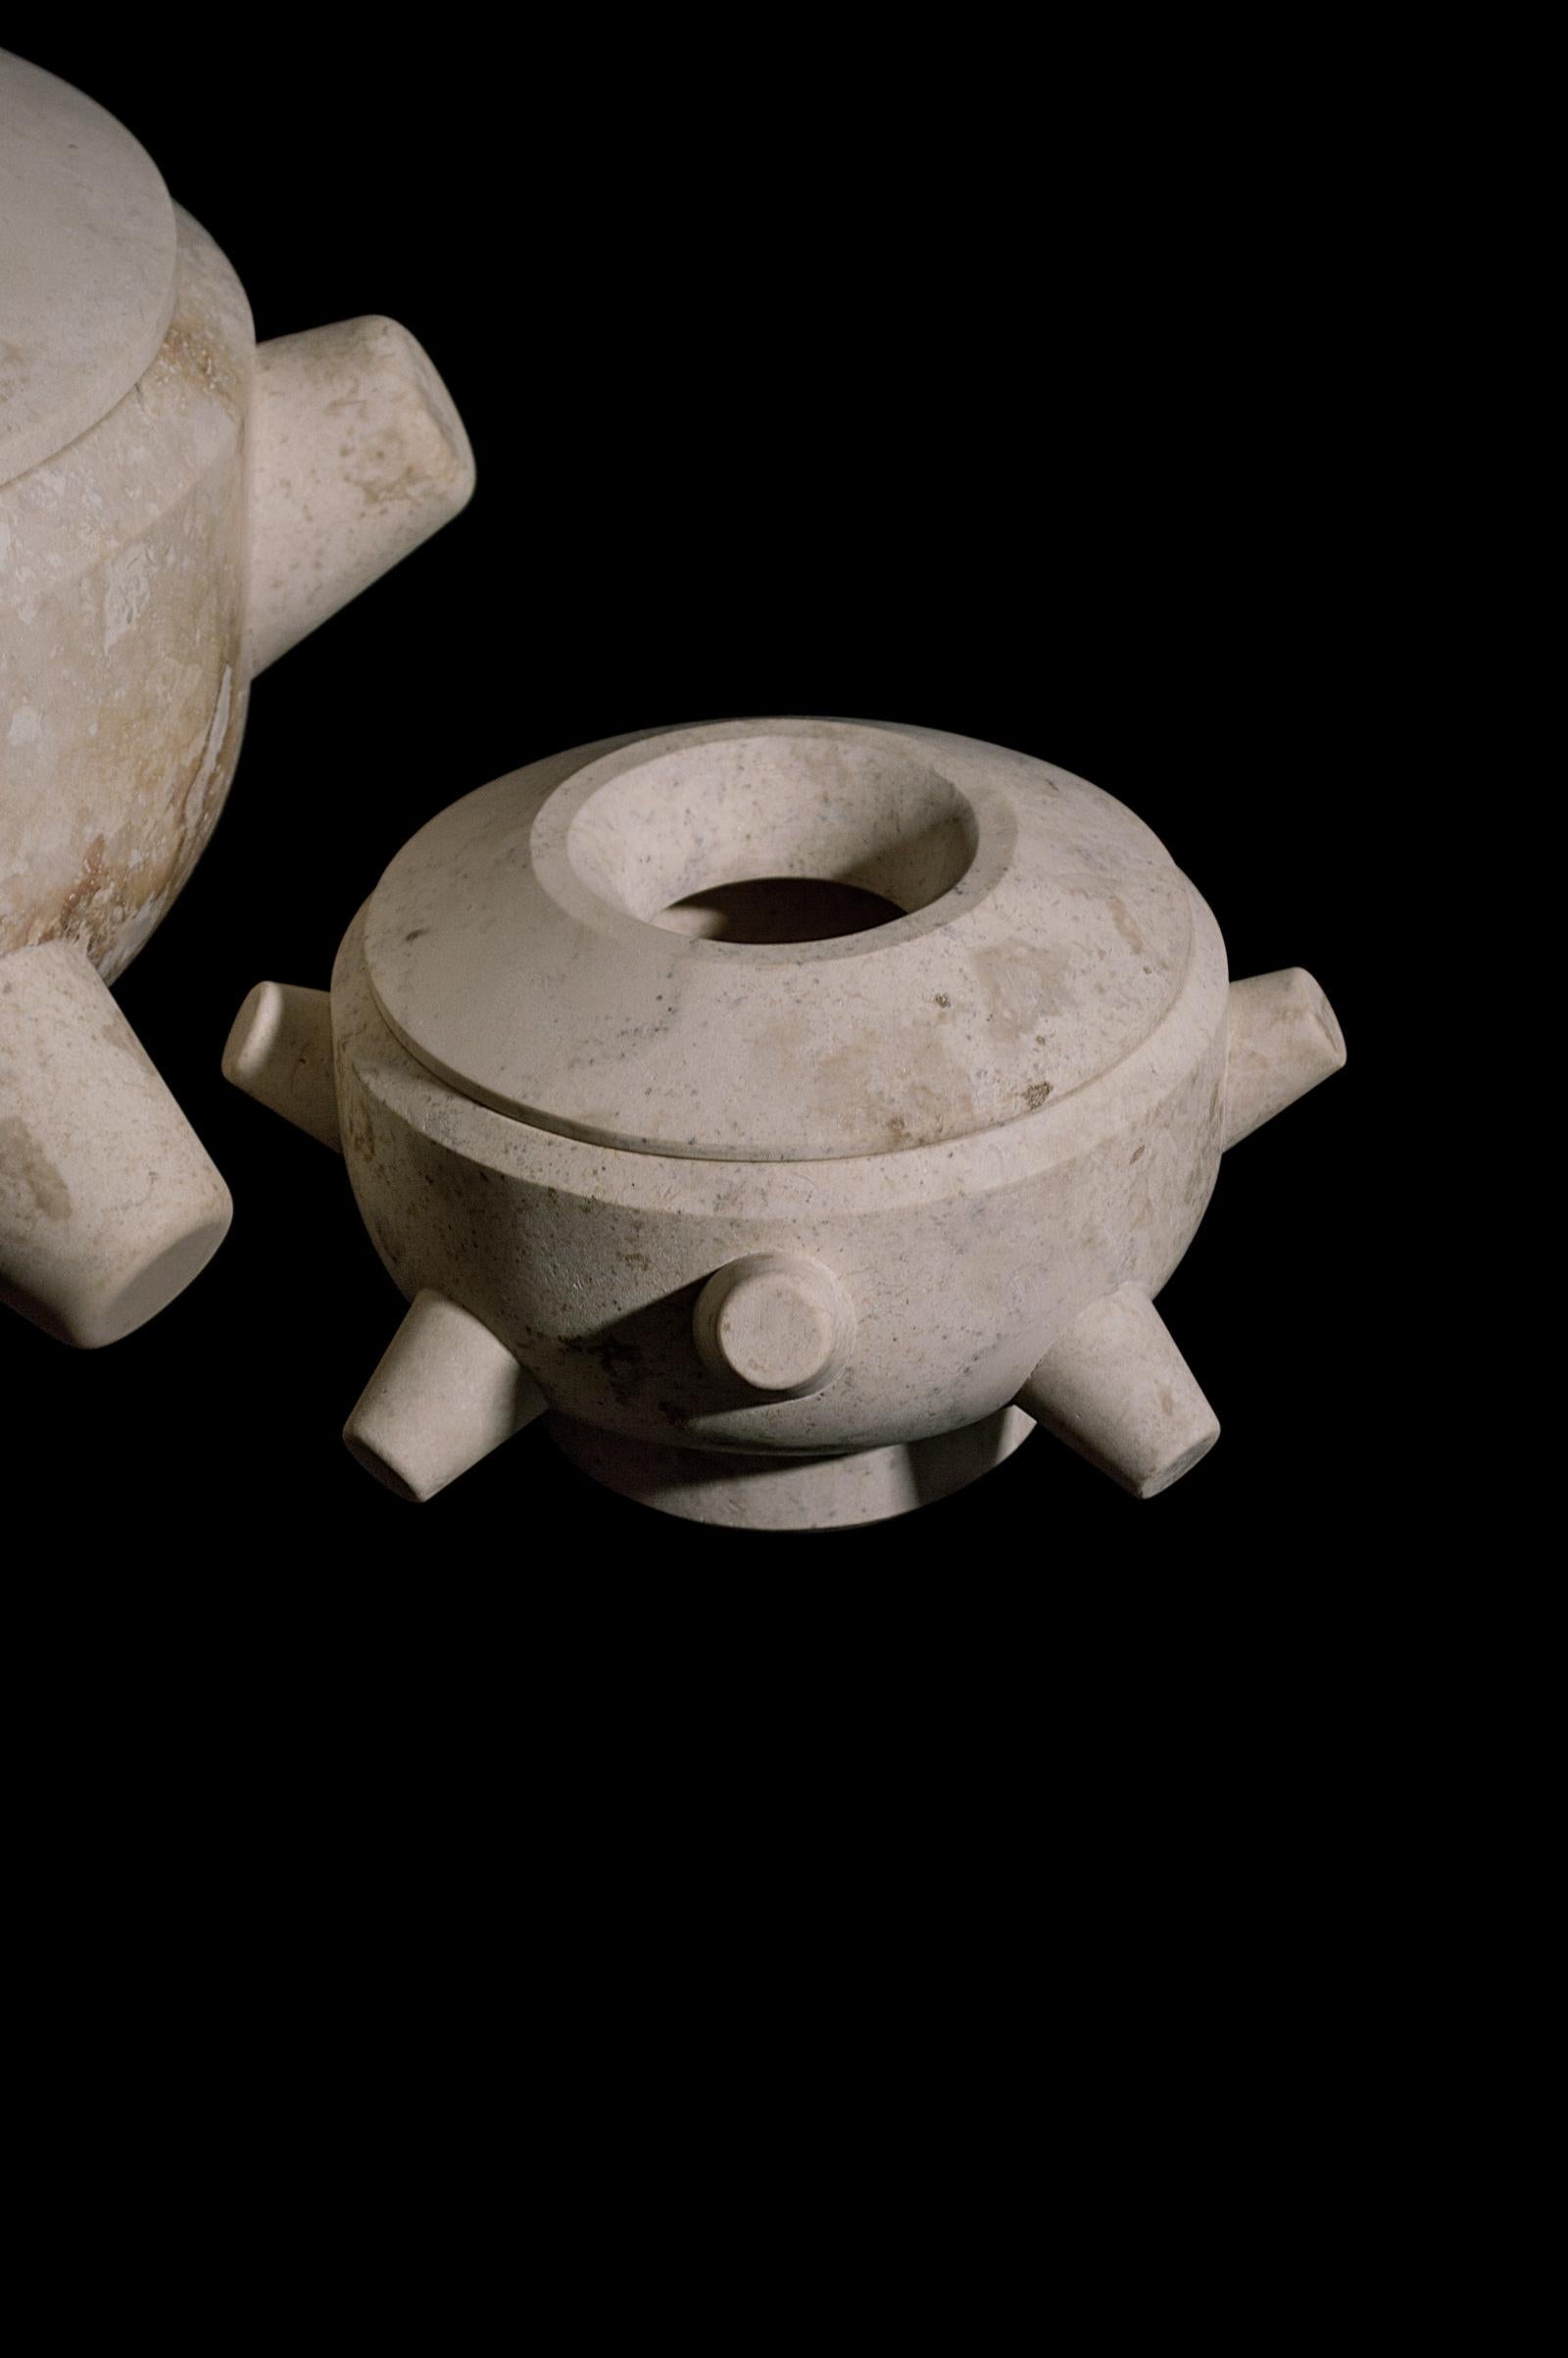 Part of ACOOCOORO’s Ceremonia special series, Copaleras (incense burners) create a play between their soft appearance, their ceremonial function and natural material: Yucatán Peninsula's Crema Maya stone. They suggest the presence of magical events,